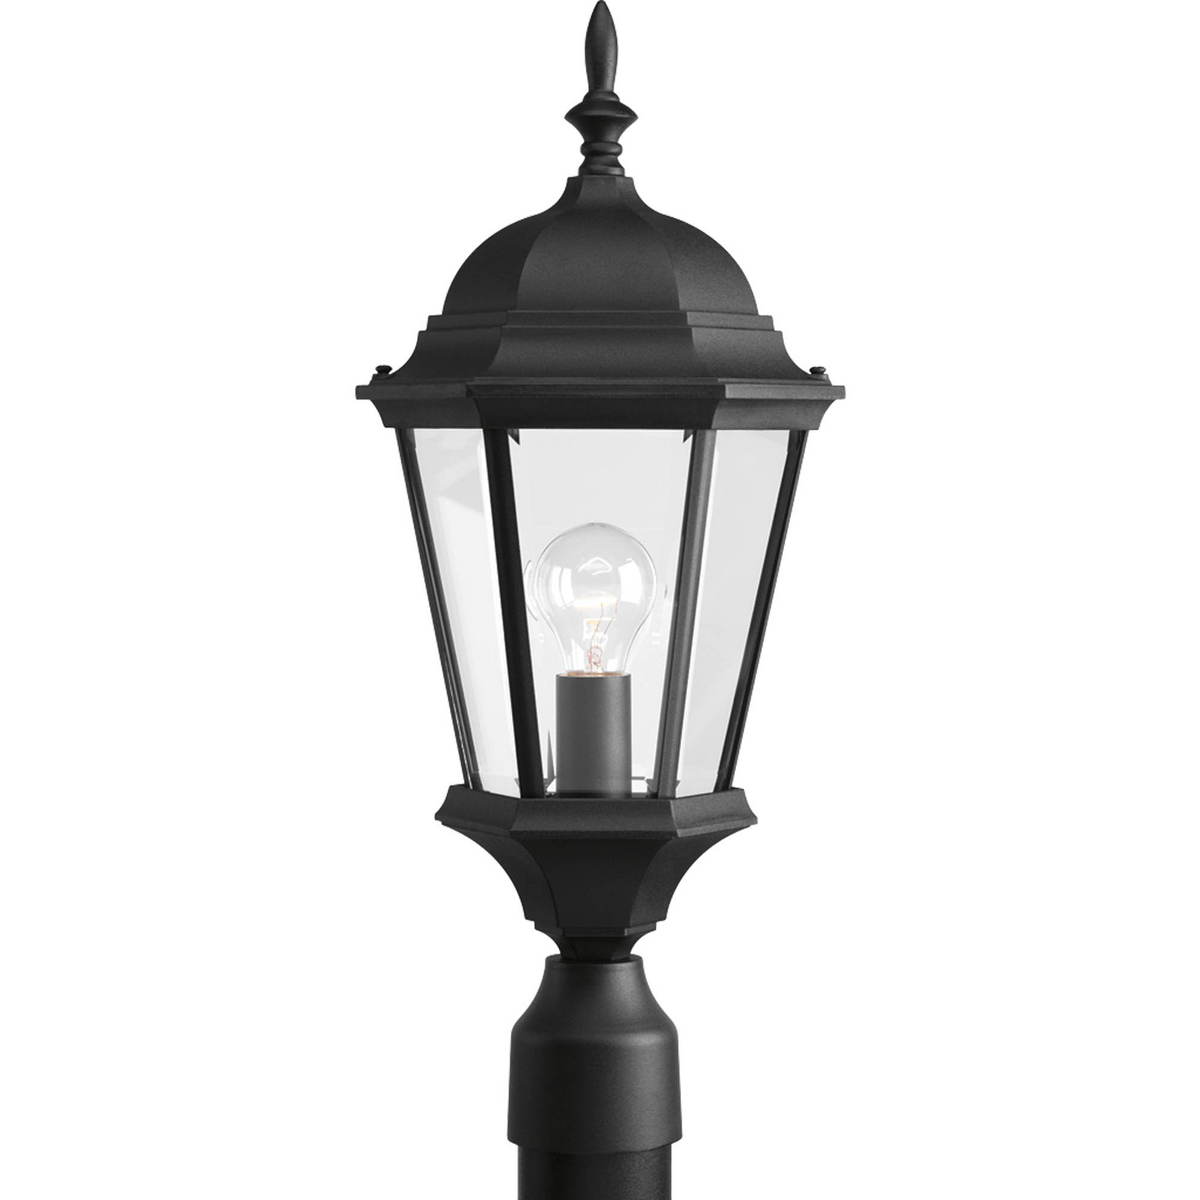 The Welbourne collection features hexagonal framework with vine inspired scrolls and clear beveled glass panels. Cast aluminum construction with durable powder coat finish. One-light post lantern. Textured Black finish.